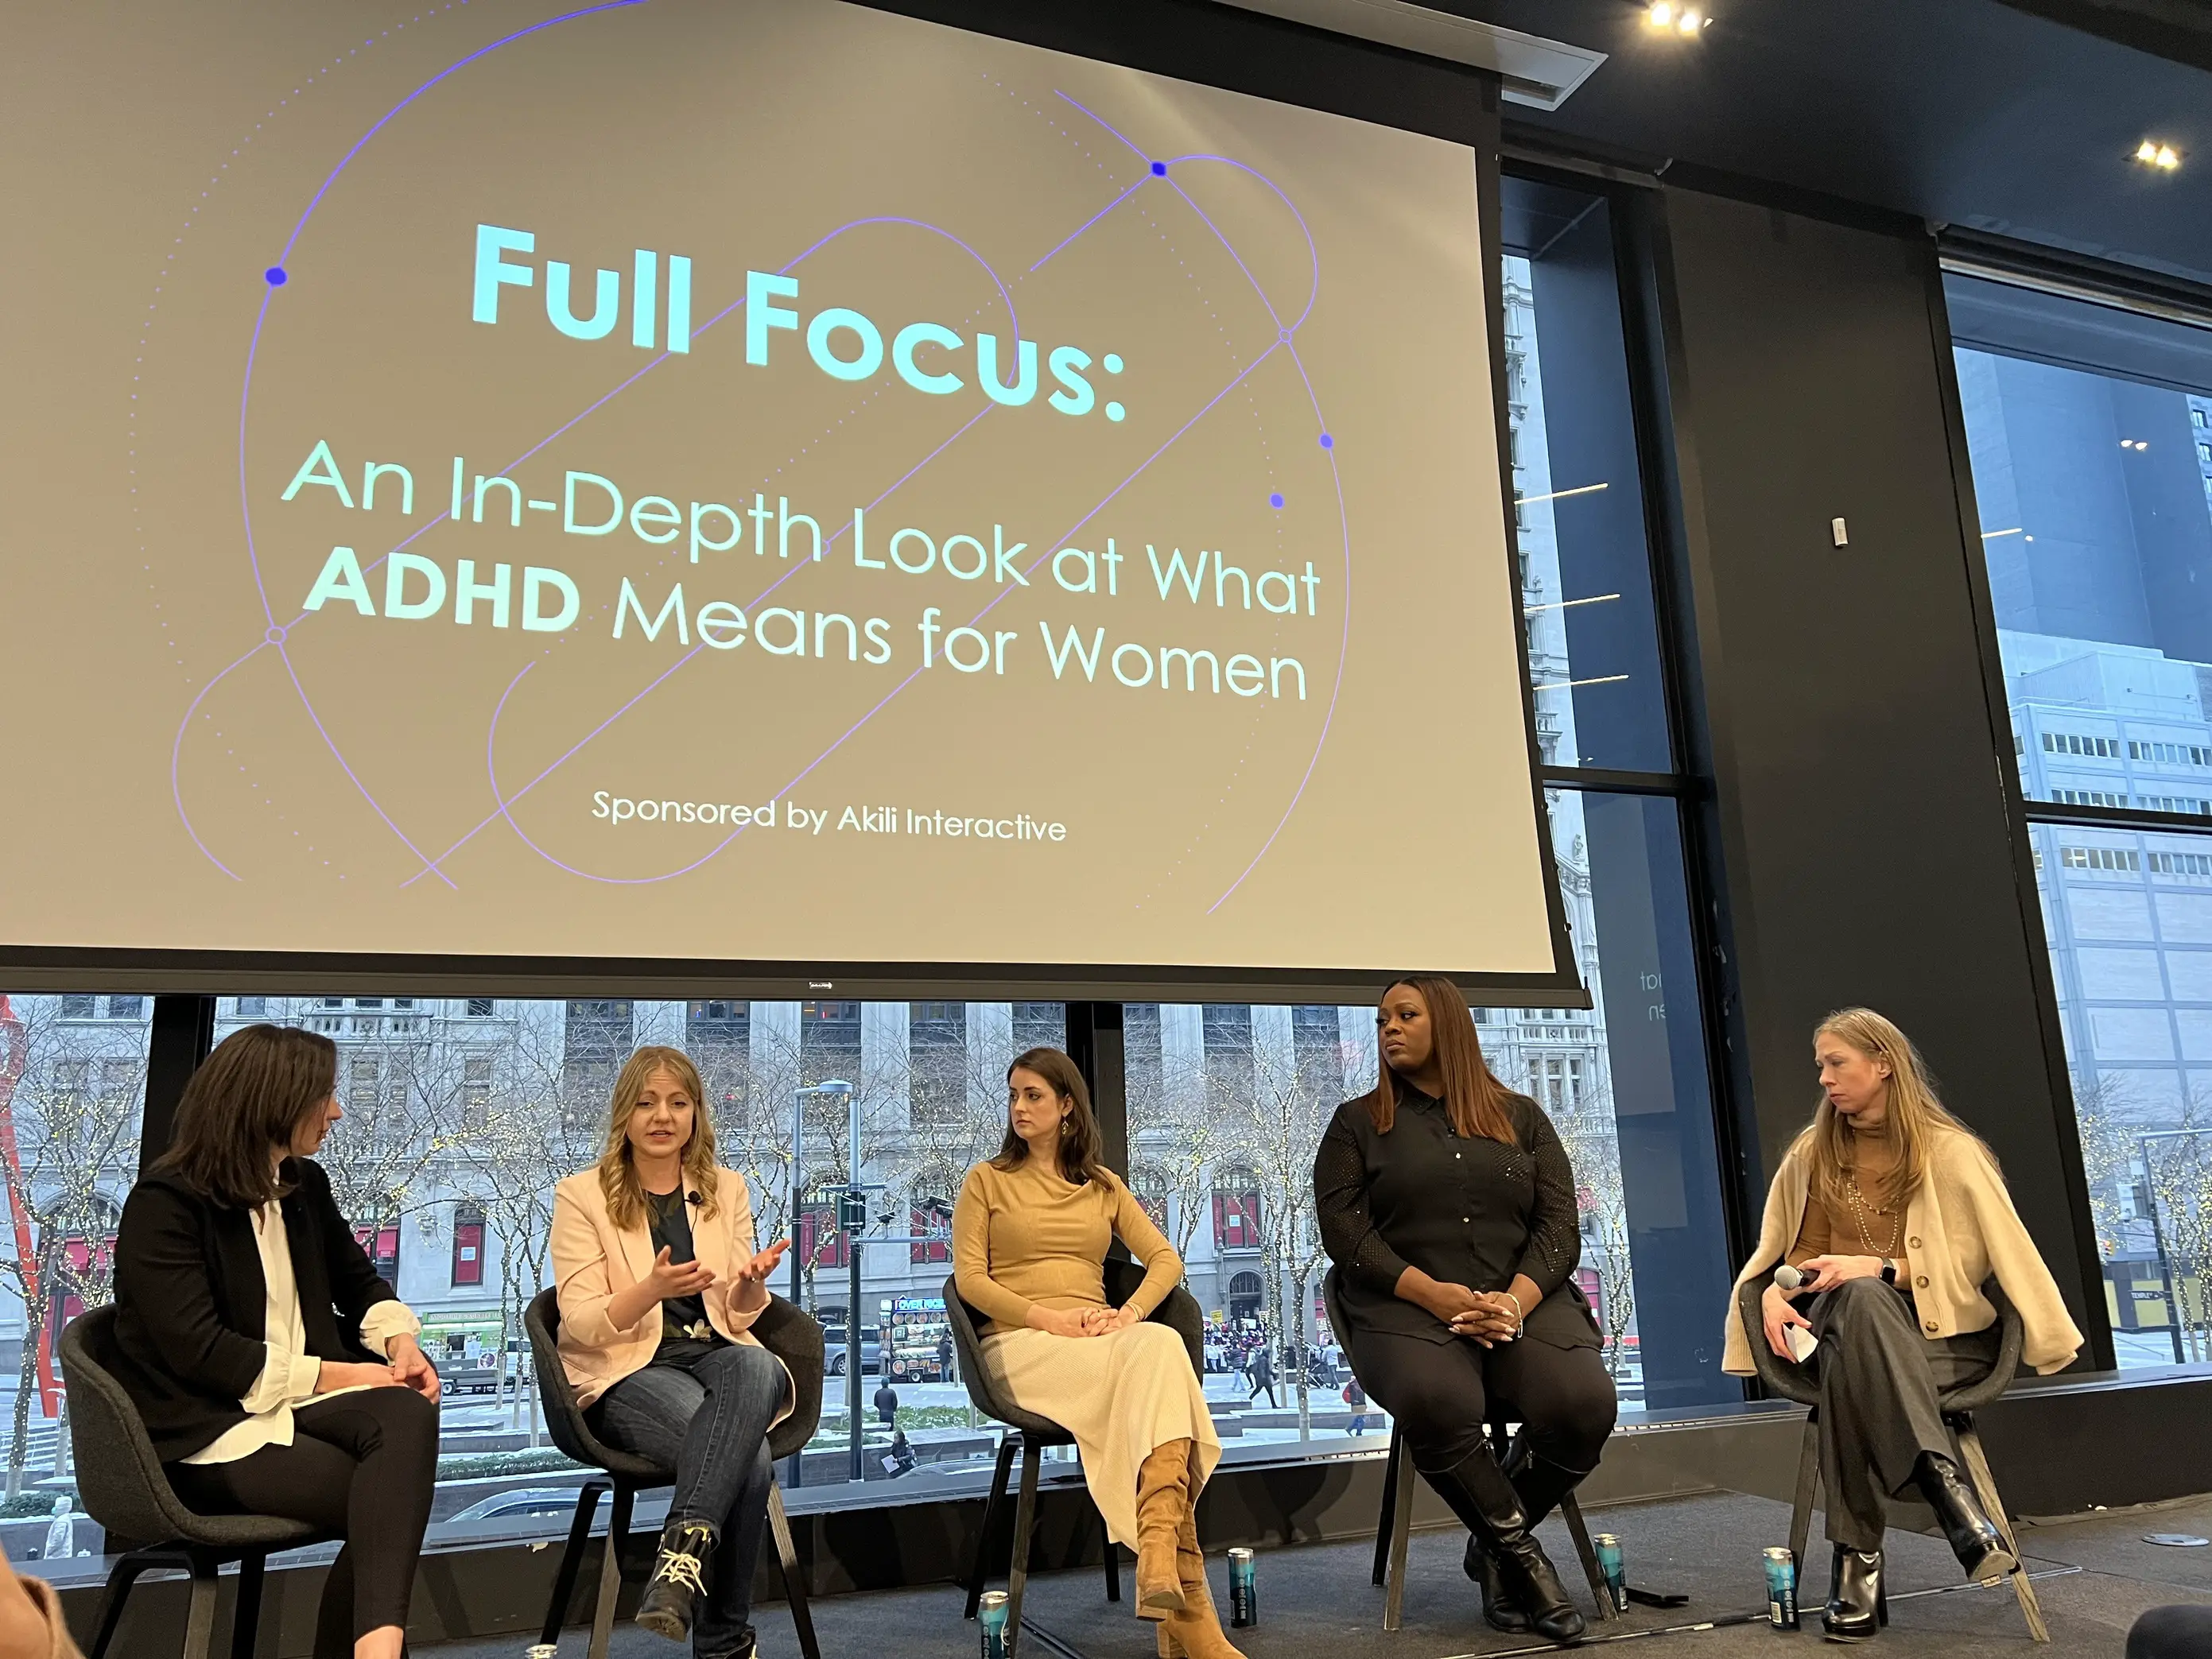 Expert panelists call for more research on ADHD in women, girls